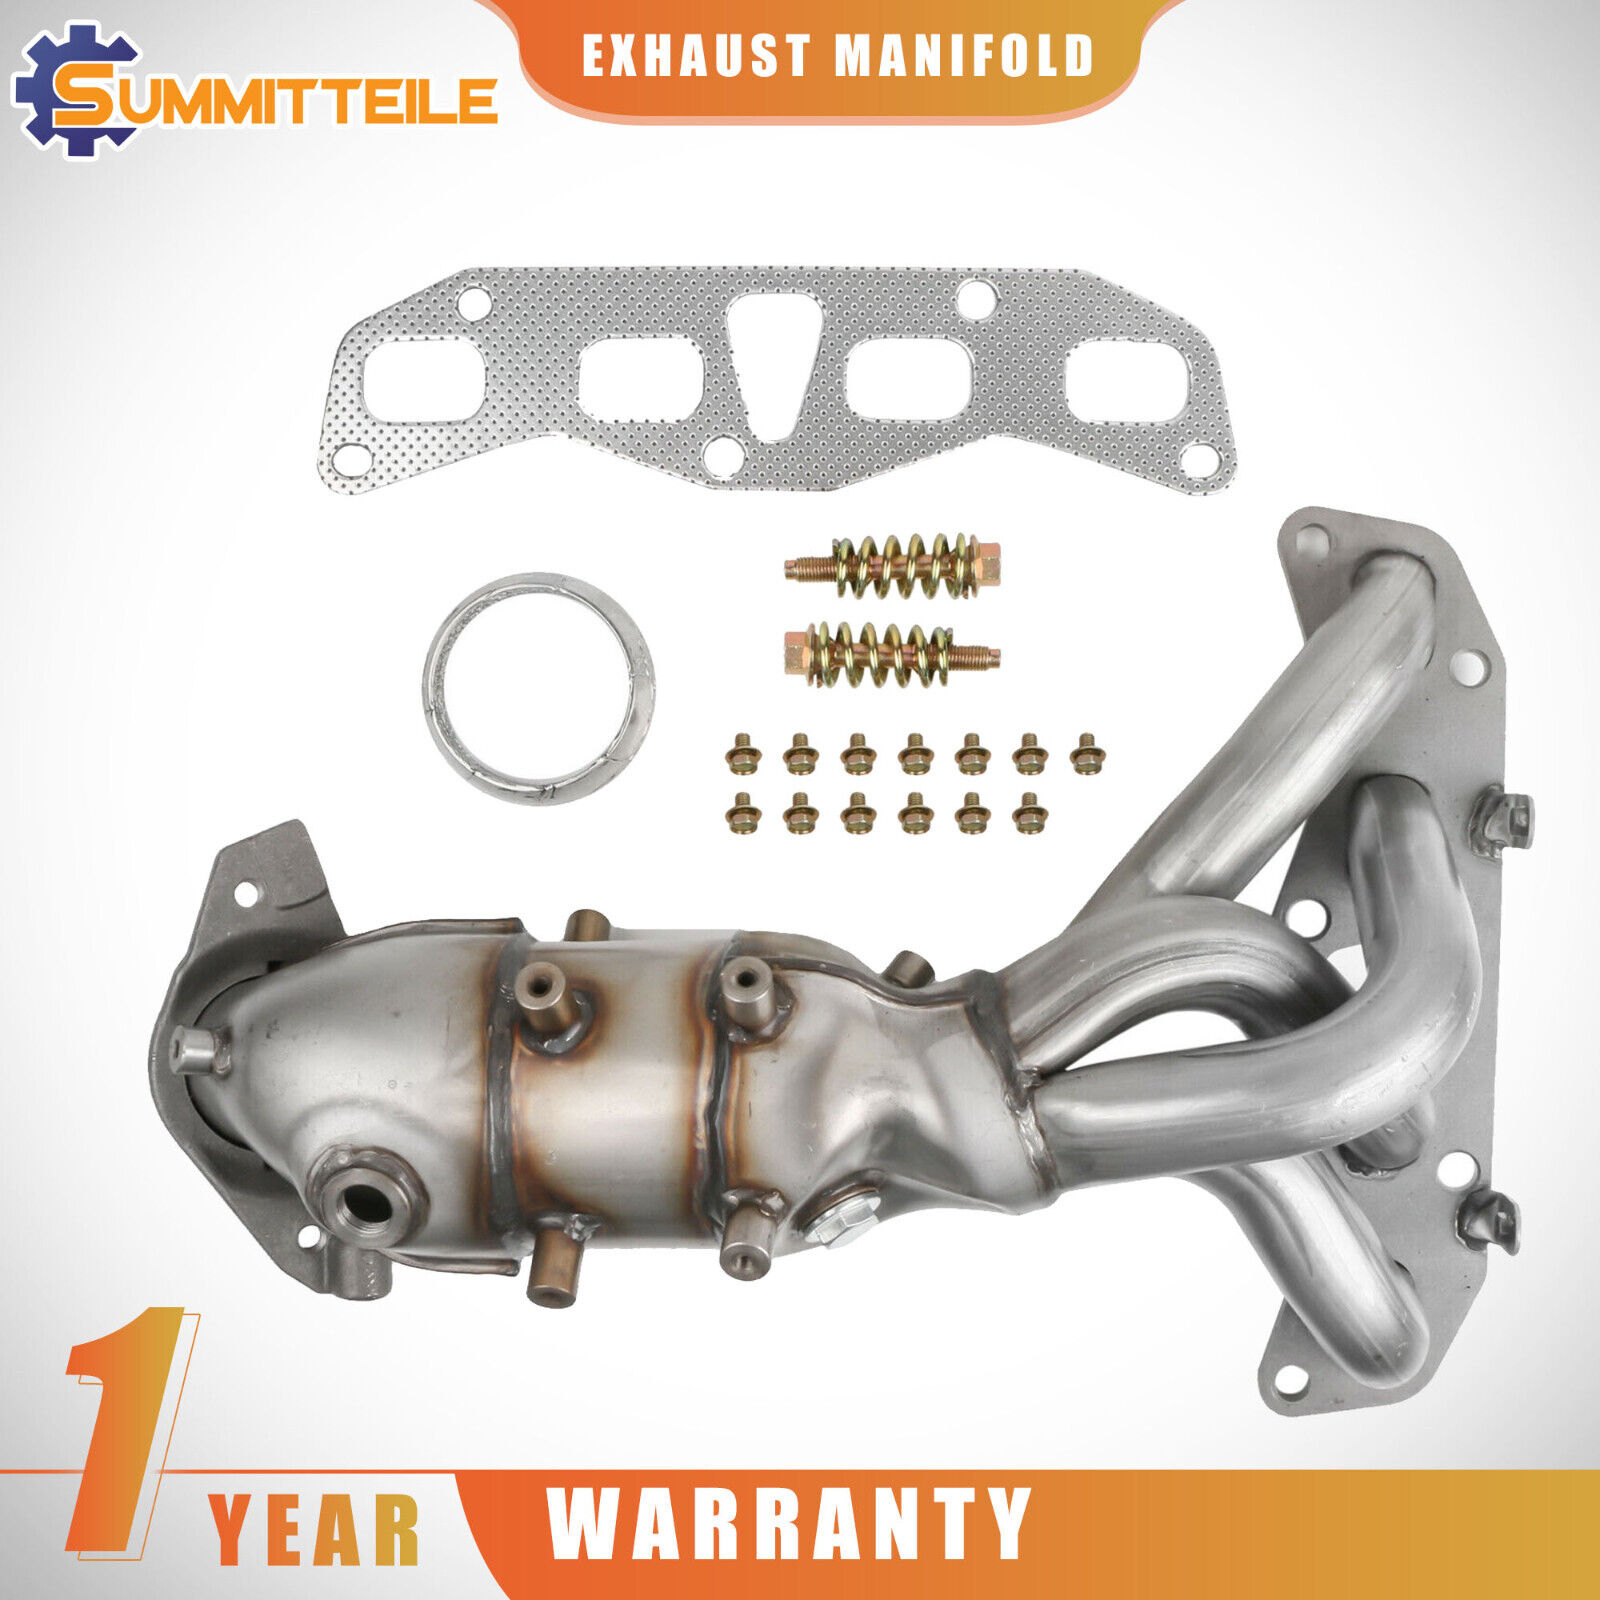 Exhaust Manifold Catalytic Converter w/ Gasket For Nissan Altima Sentra L4 2.5L